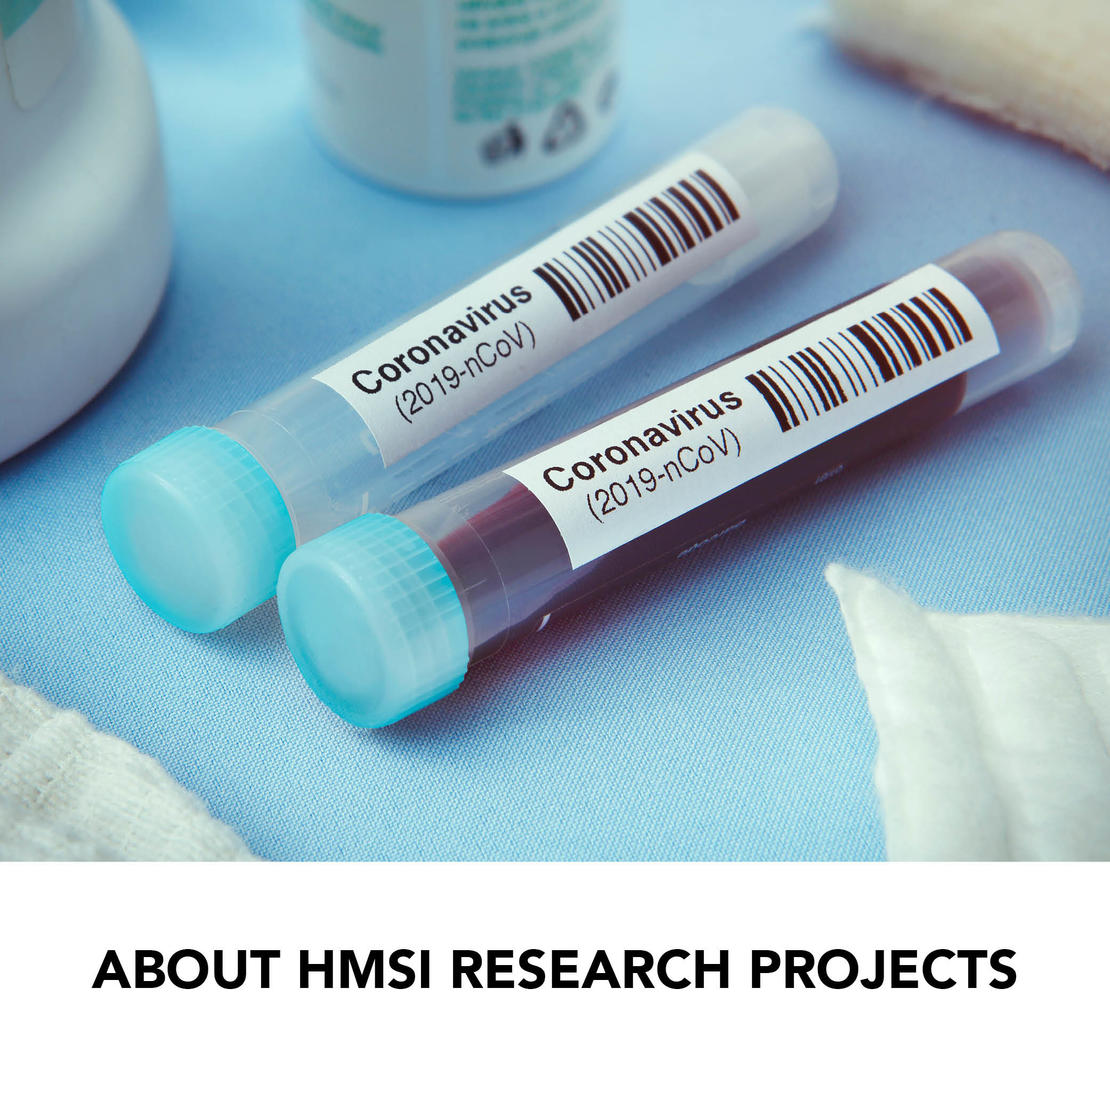 ABOUT HMSI RESEARCH PROJECTS